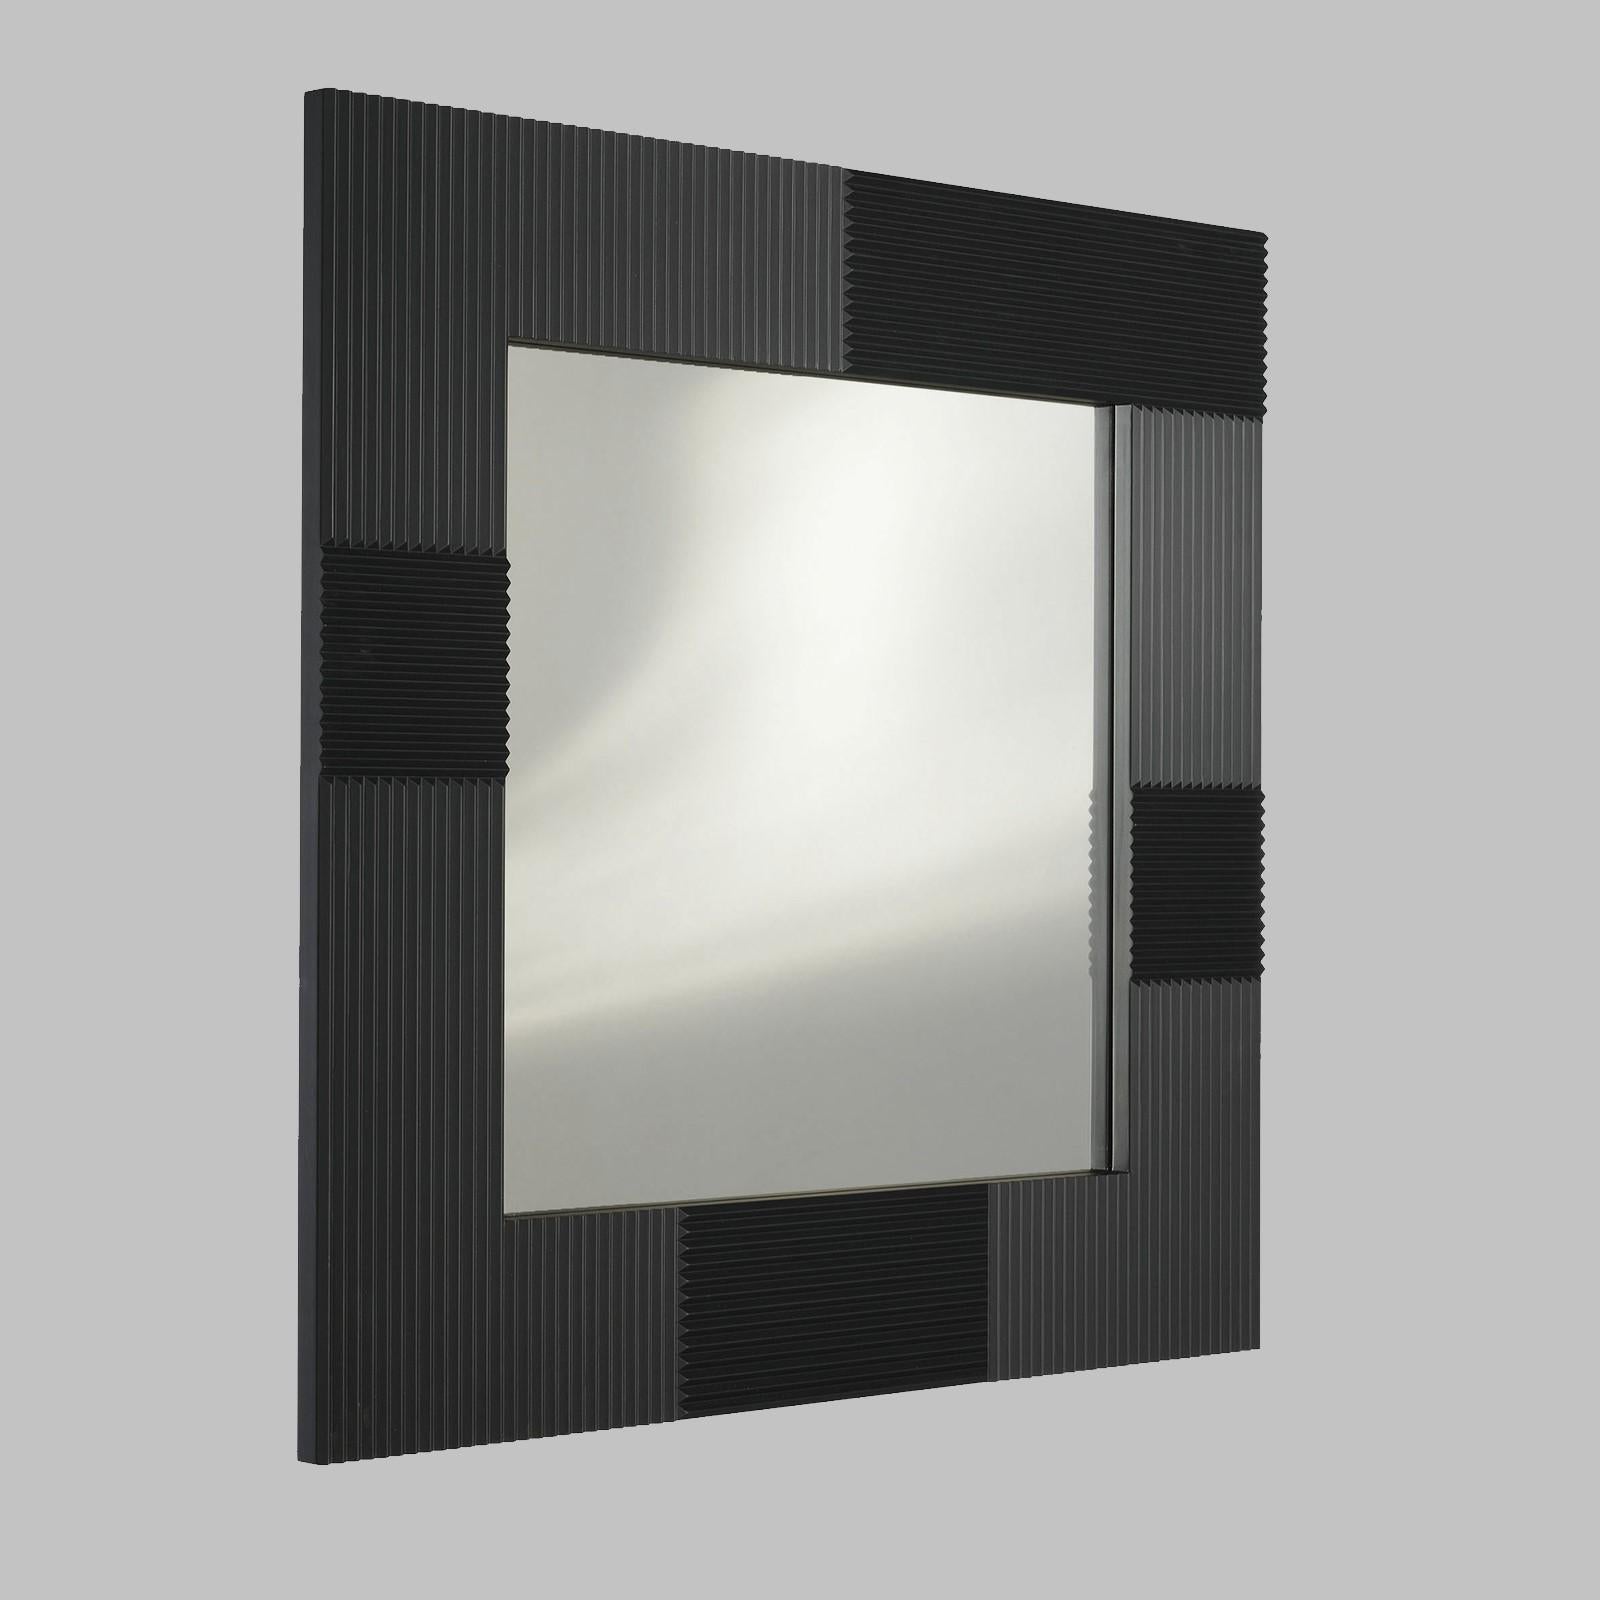 Combining a simple silhouette with a striking surface, this modern mirror will enrich a contemporary home. Either placed above a mantelpiece, in an entryway, or over a sink in a powder room, this piece will frame a wall with sophistication,